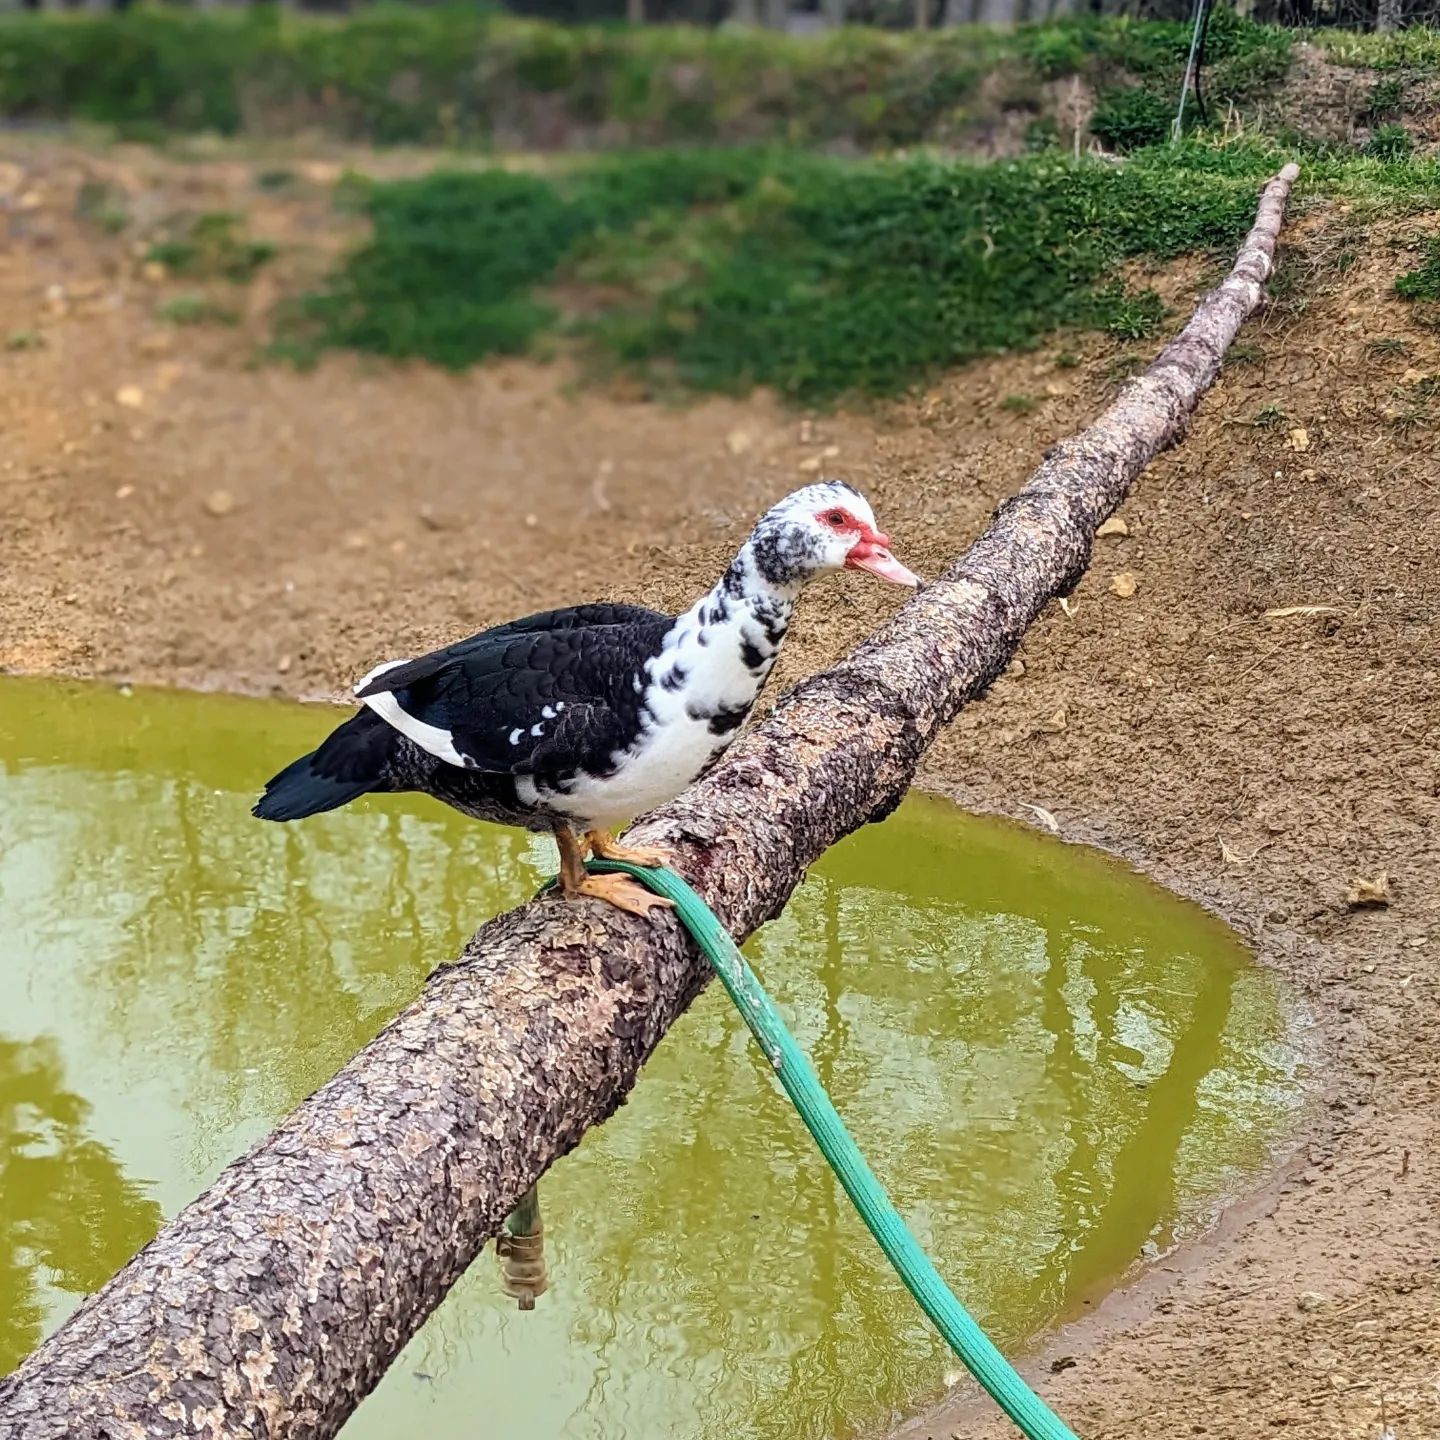 Female Muscovy duck chilling on a tree trunk